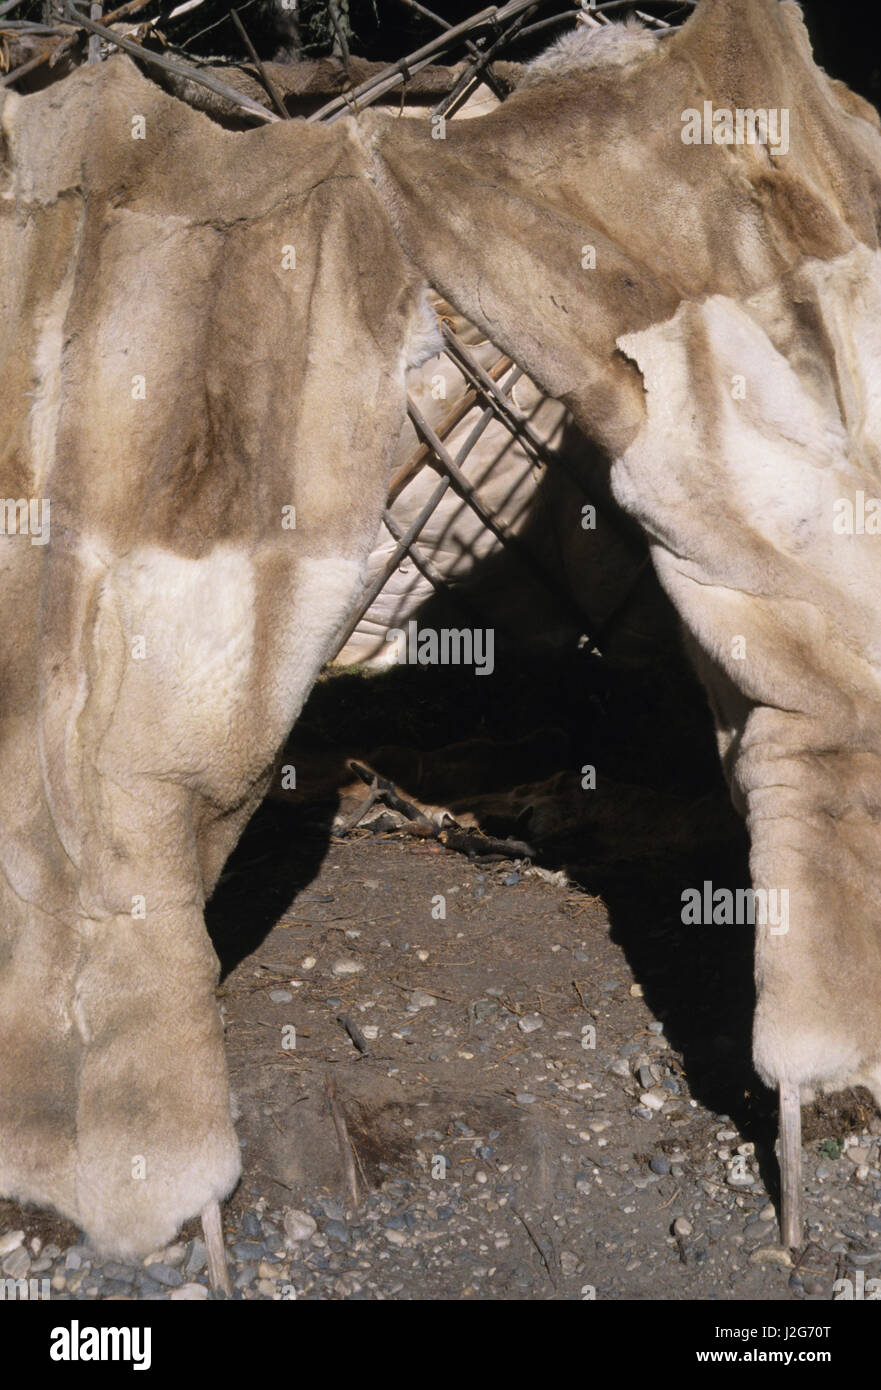 Traditional Athabaskan dome shaped dwelling covered with caribou hides called a wickiup used mainly during hunts. Chena Village, Alaska (PR) Stock Photo